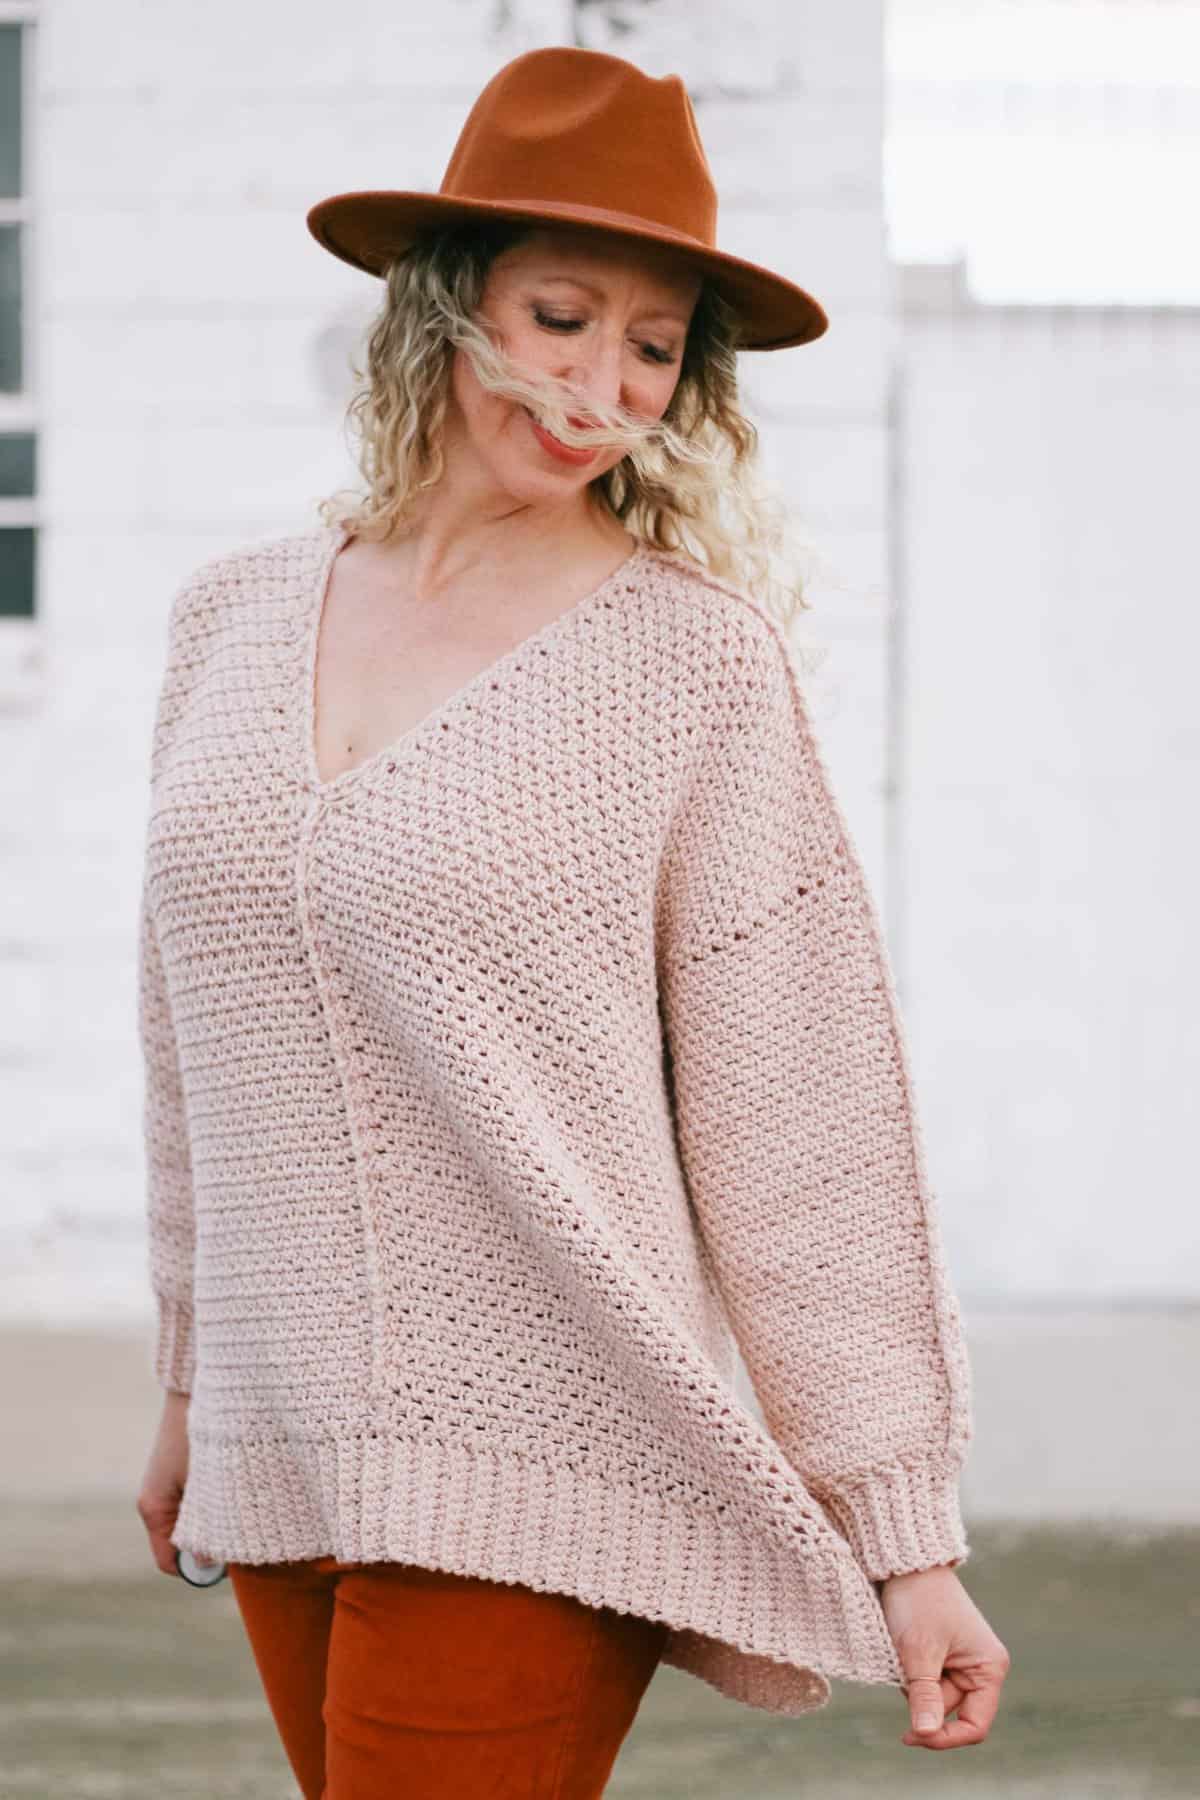 Woman wearing casual crochet pullover pattern with stylish exposed seams.